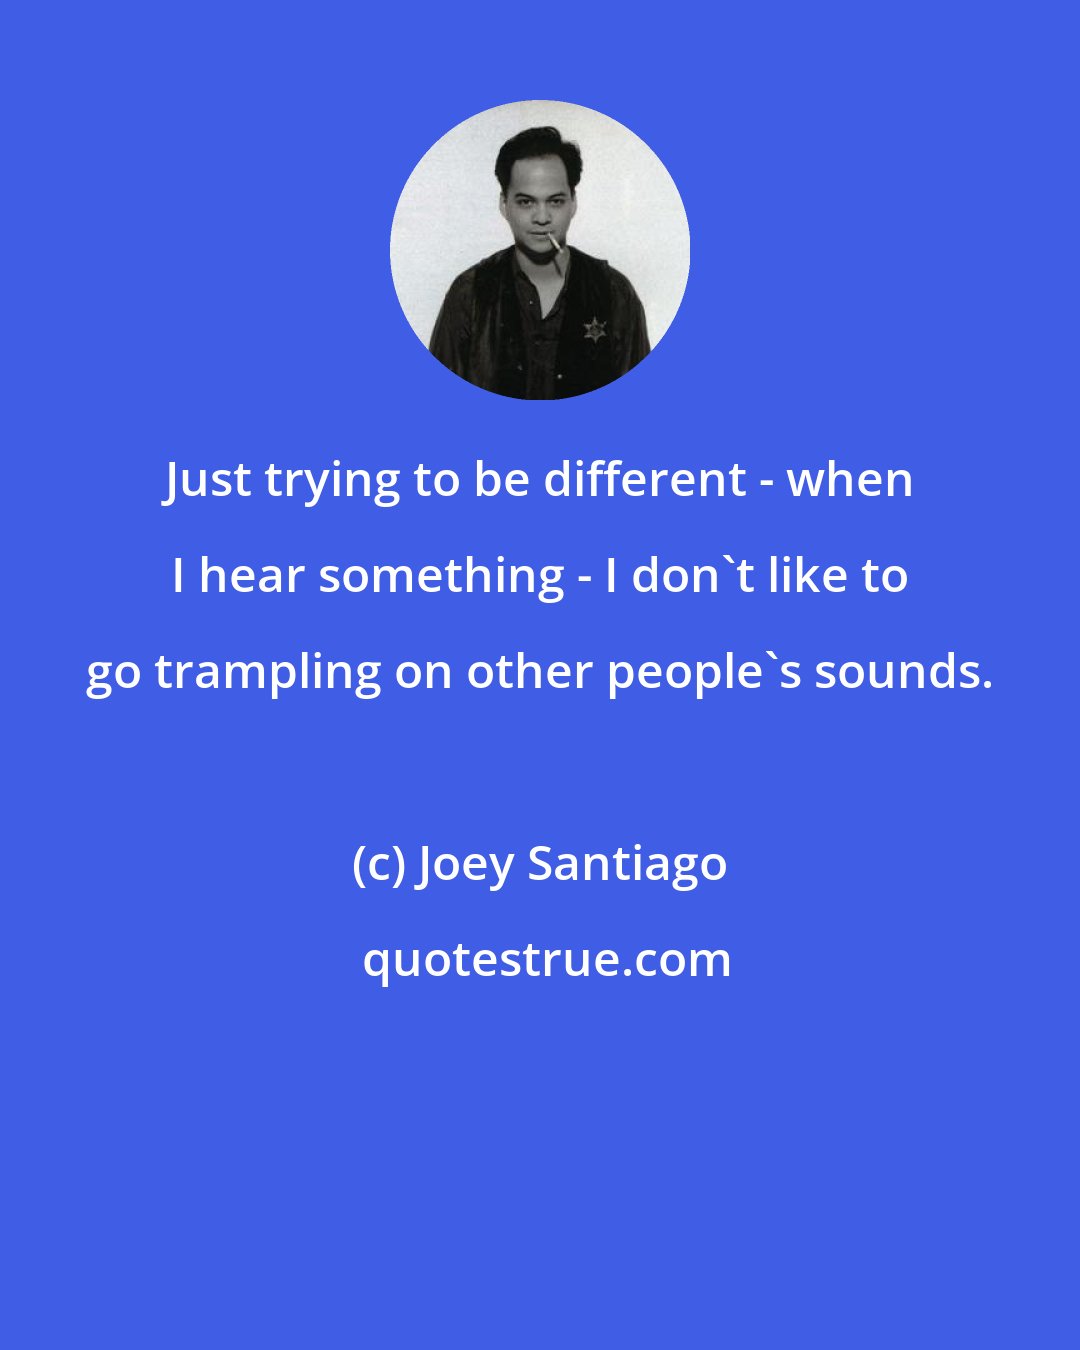 Joey Santiago: Just trying to be different - when I hear something - I don't like to go trampling on other people's sounds.